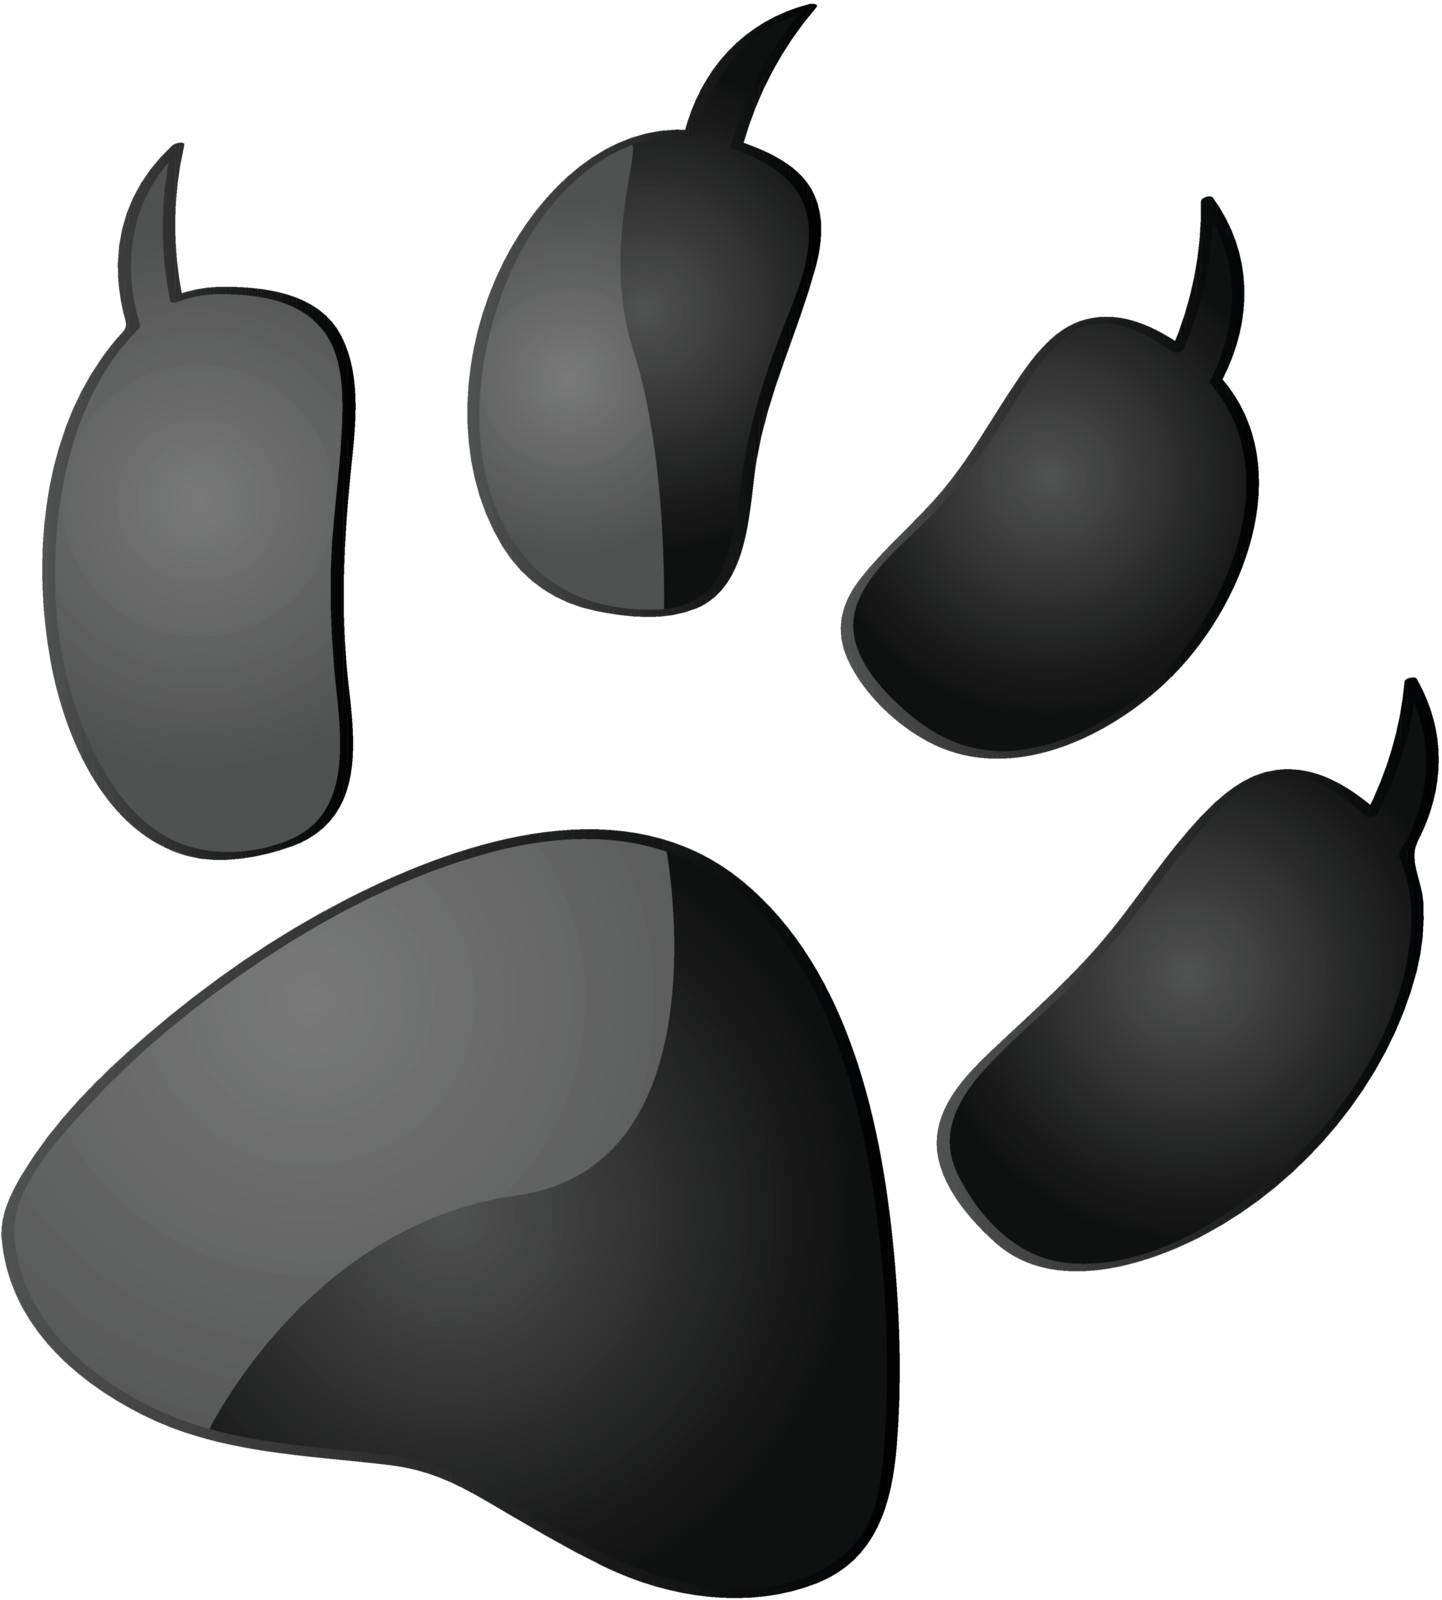 Glossy illustration of the outline of an animal paw print